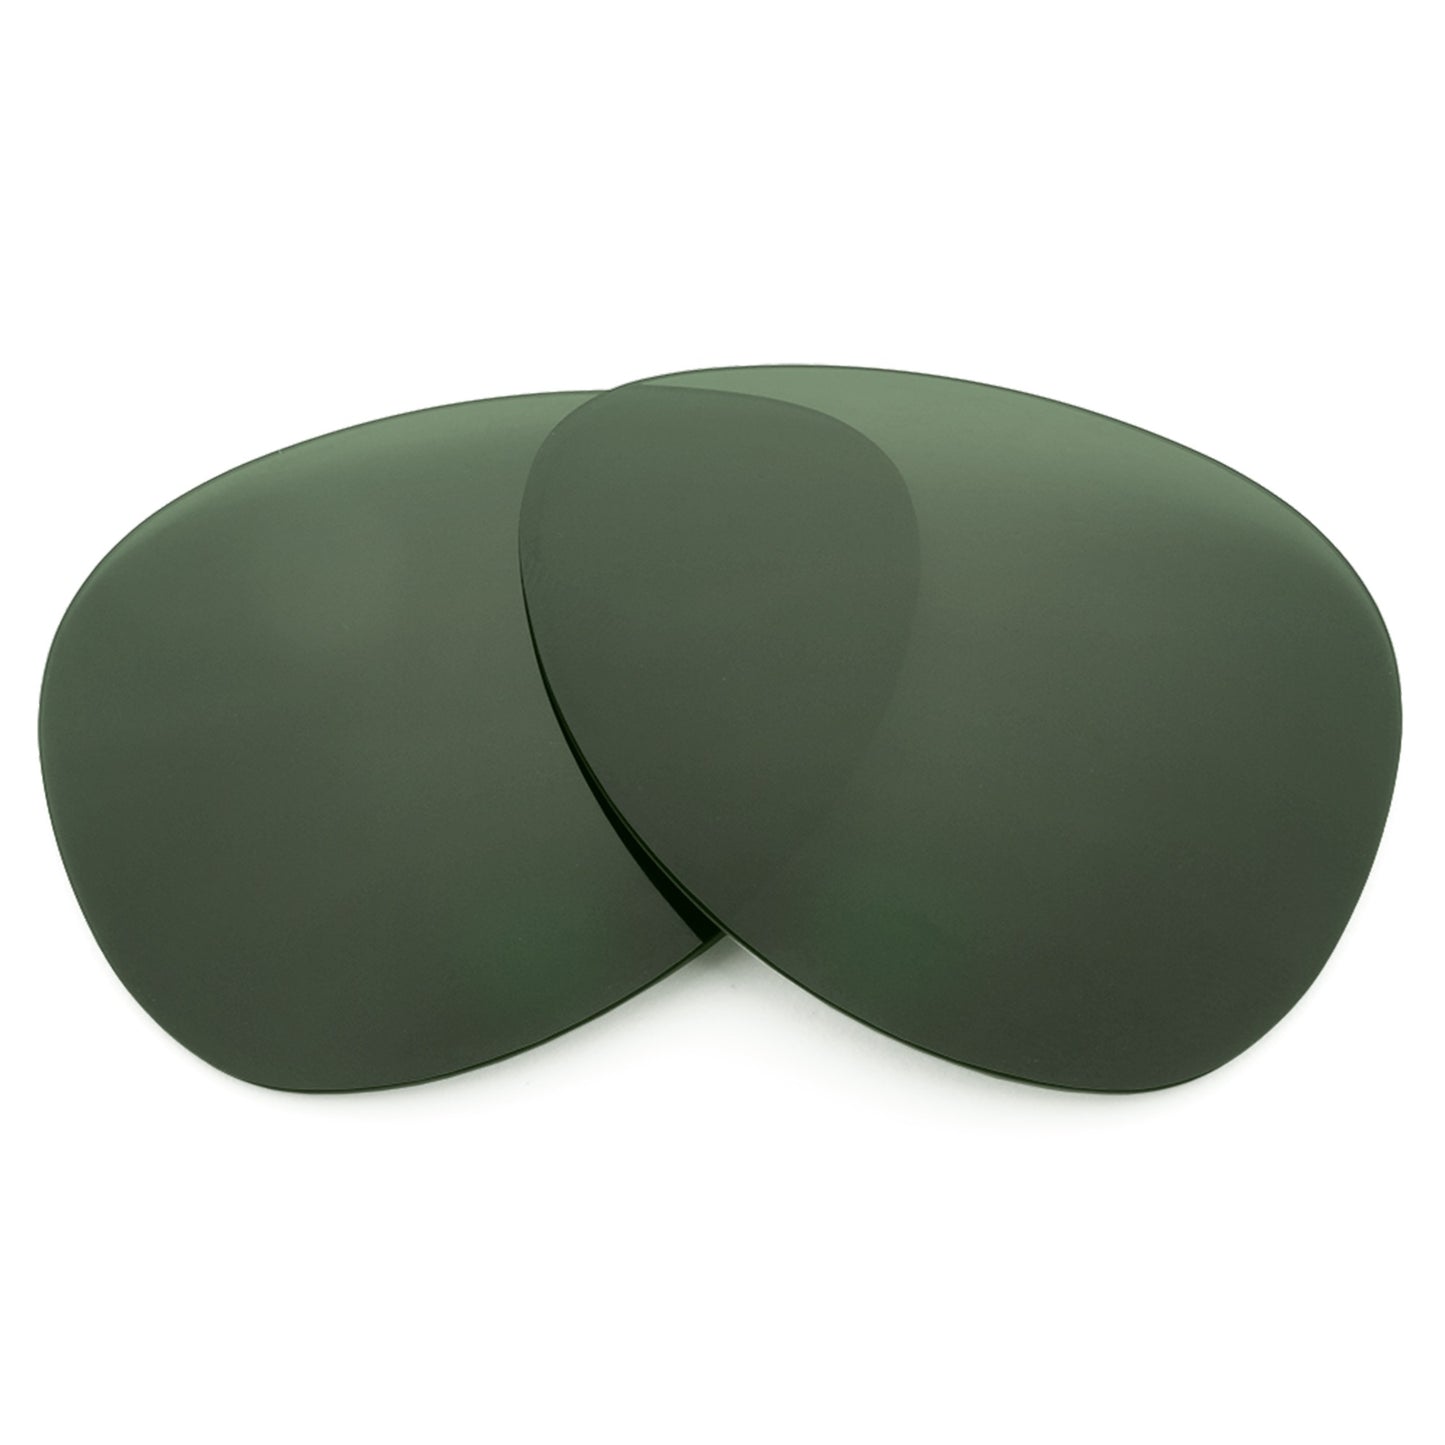 Revant replacement lenses for Ray-Ban Aviator RB3025 62mm Non-Polarized Gray Green